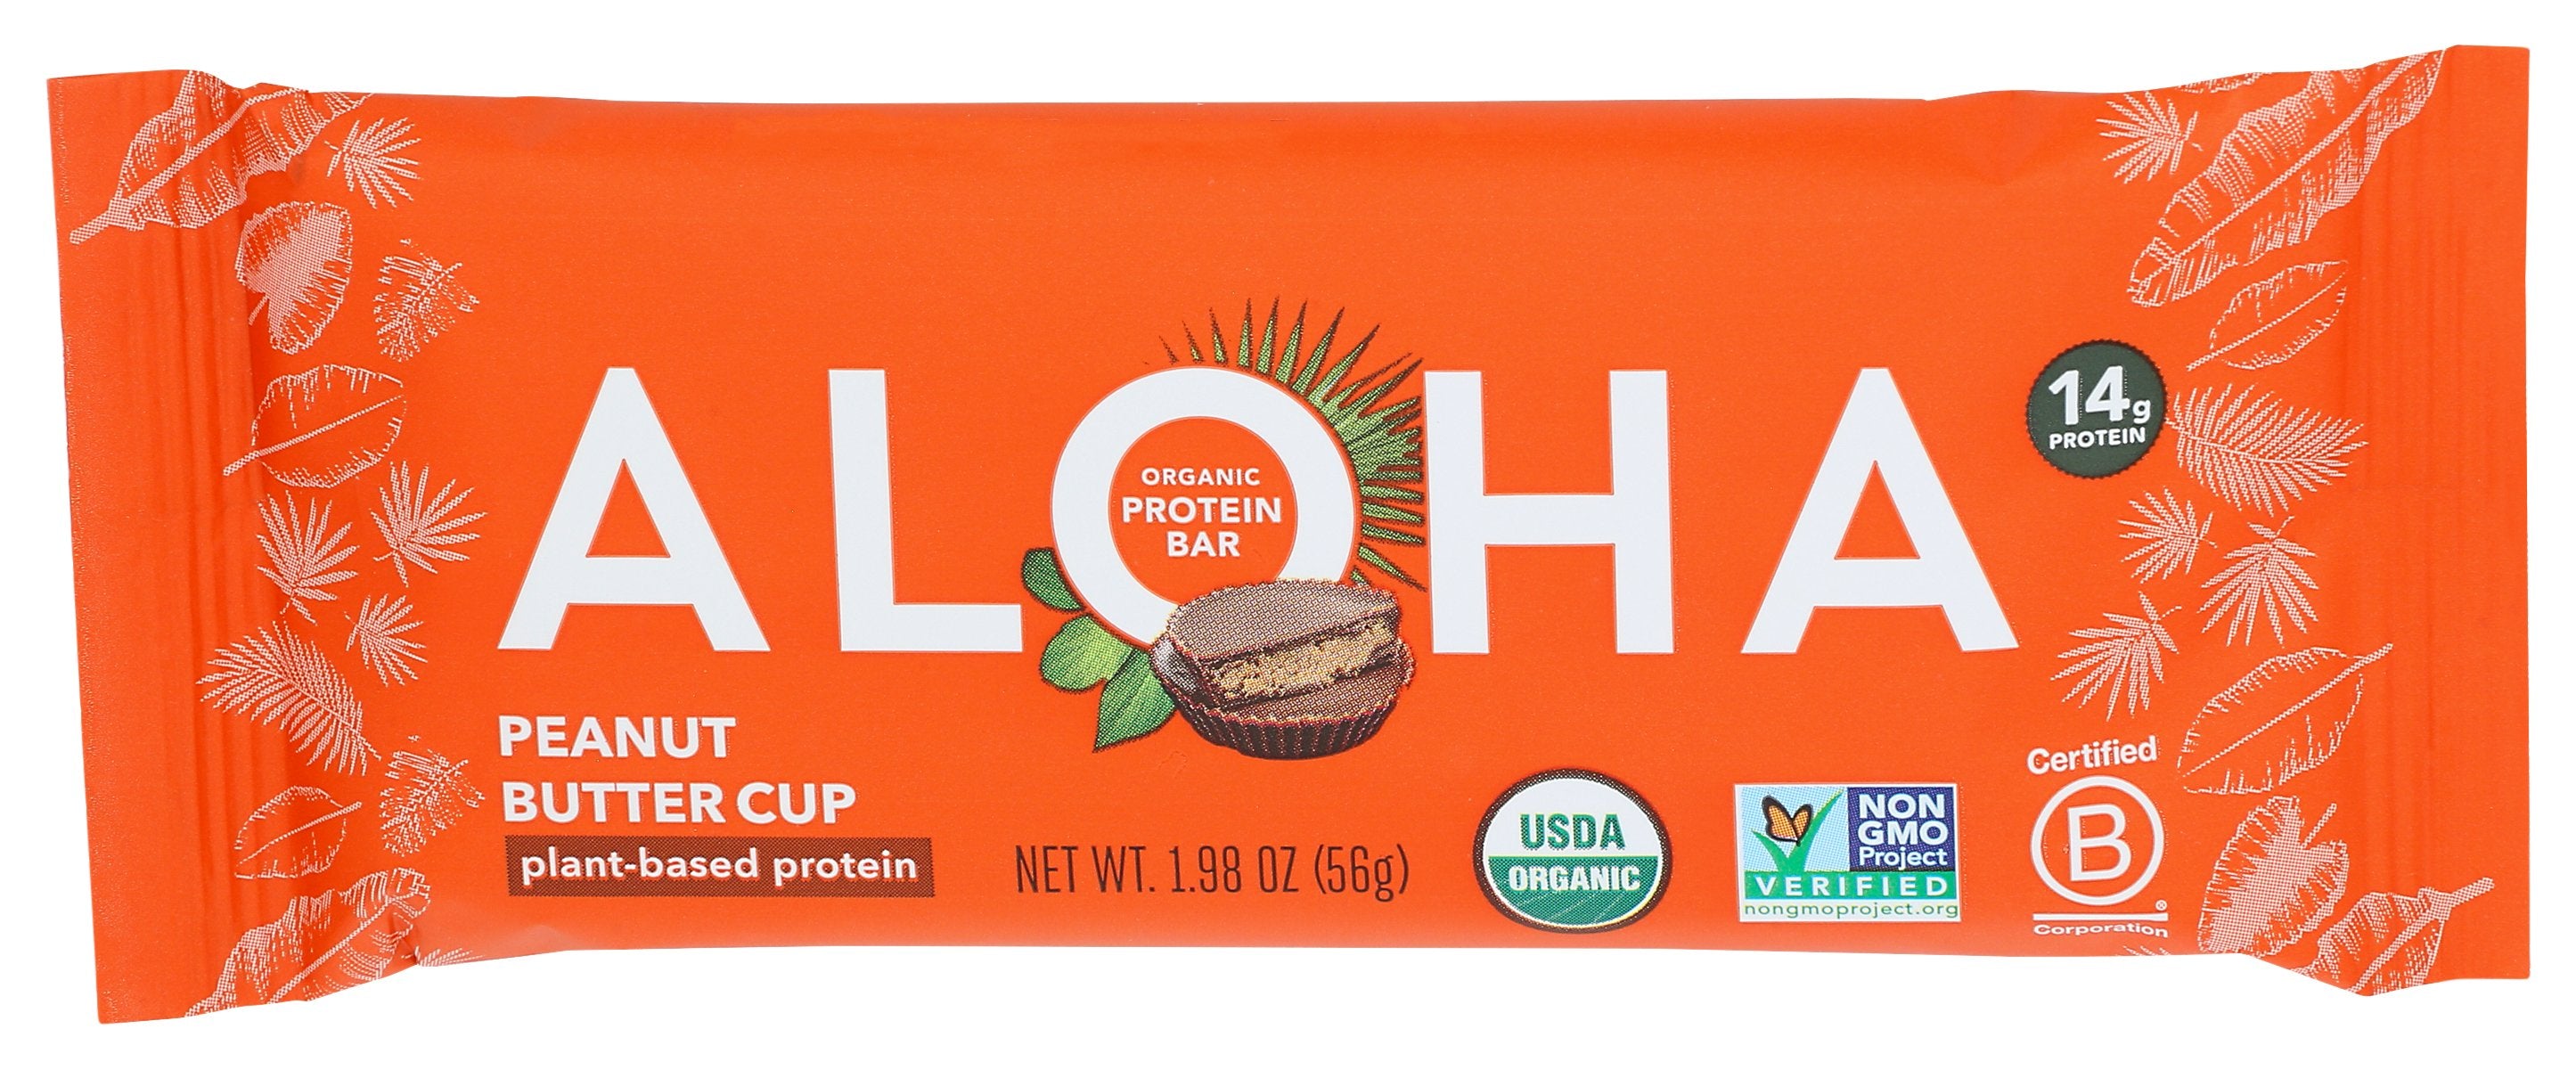 ALOHA BAR PROTEIN PNT BTTR CUP - Case of 12